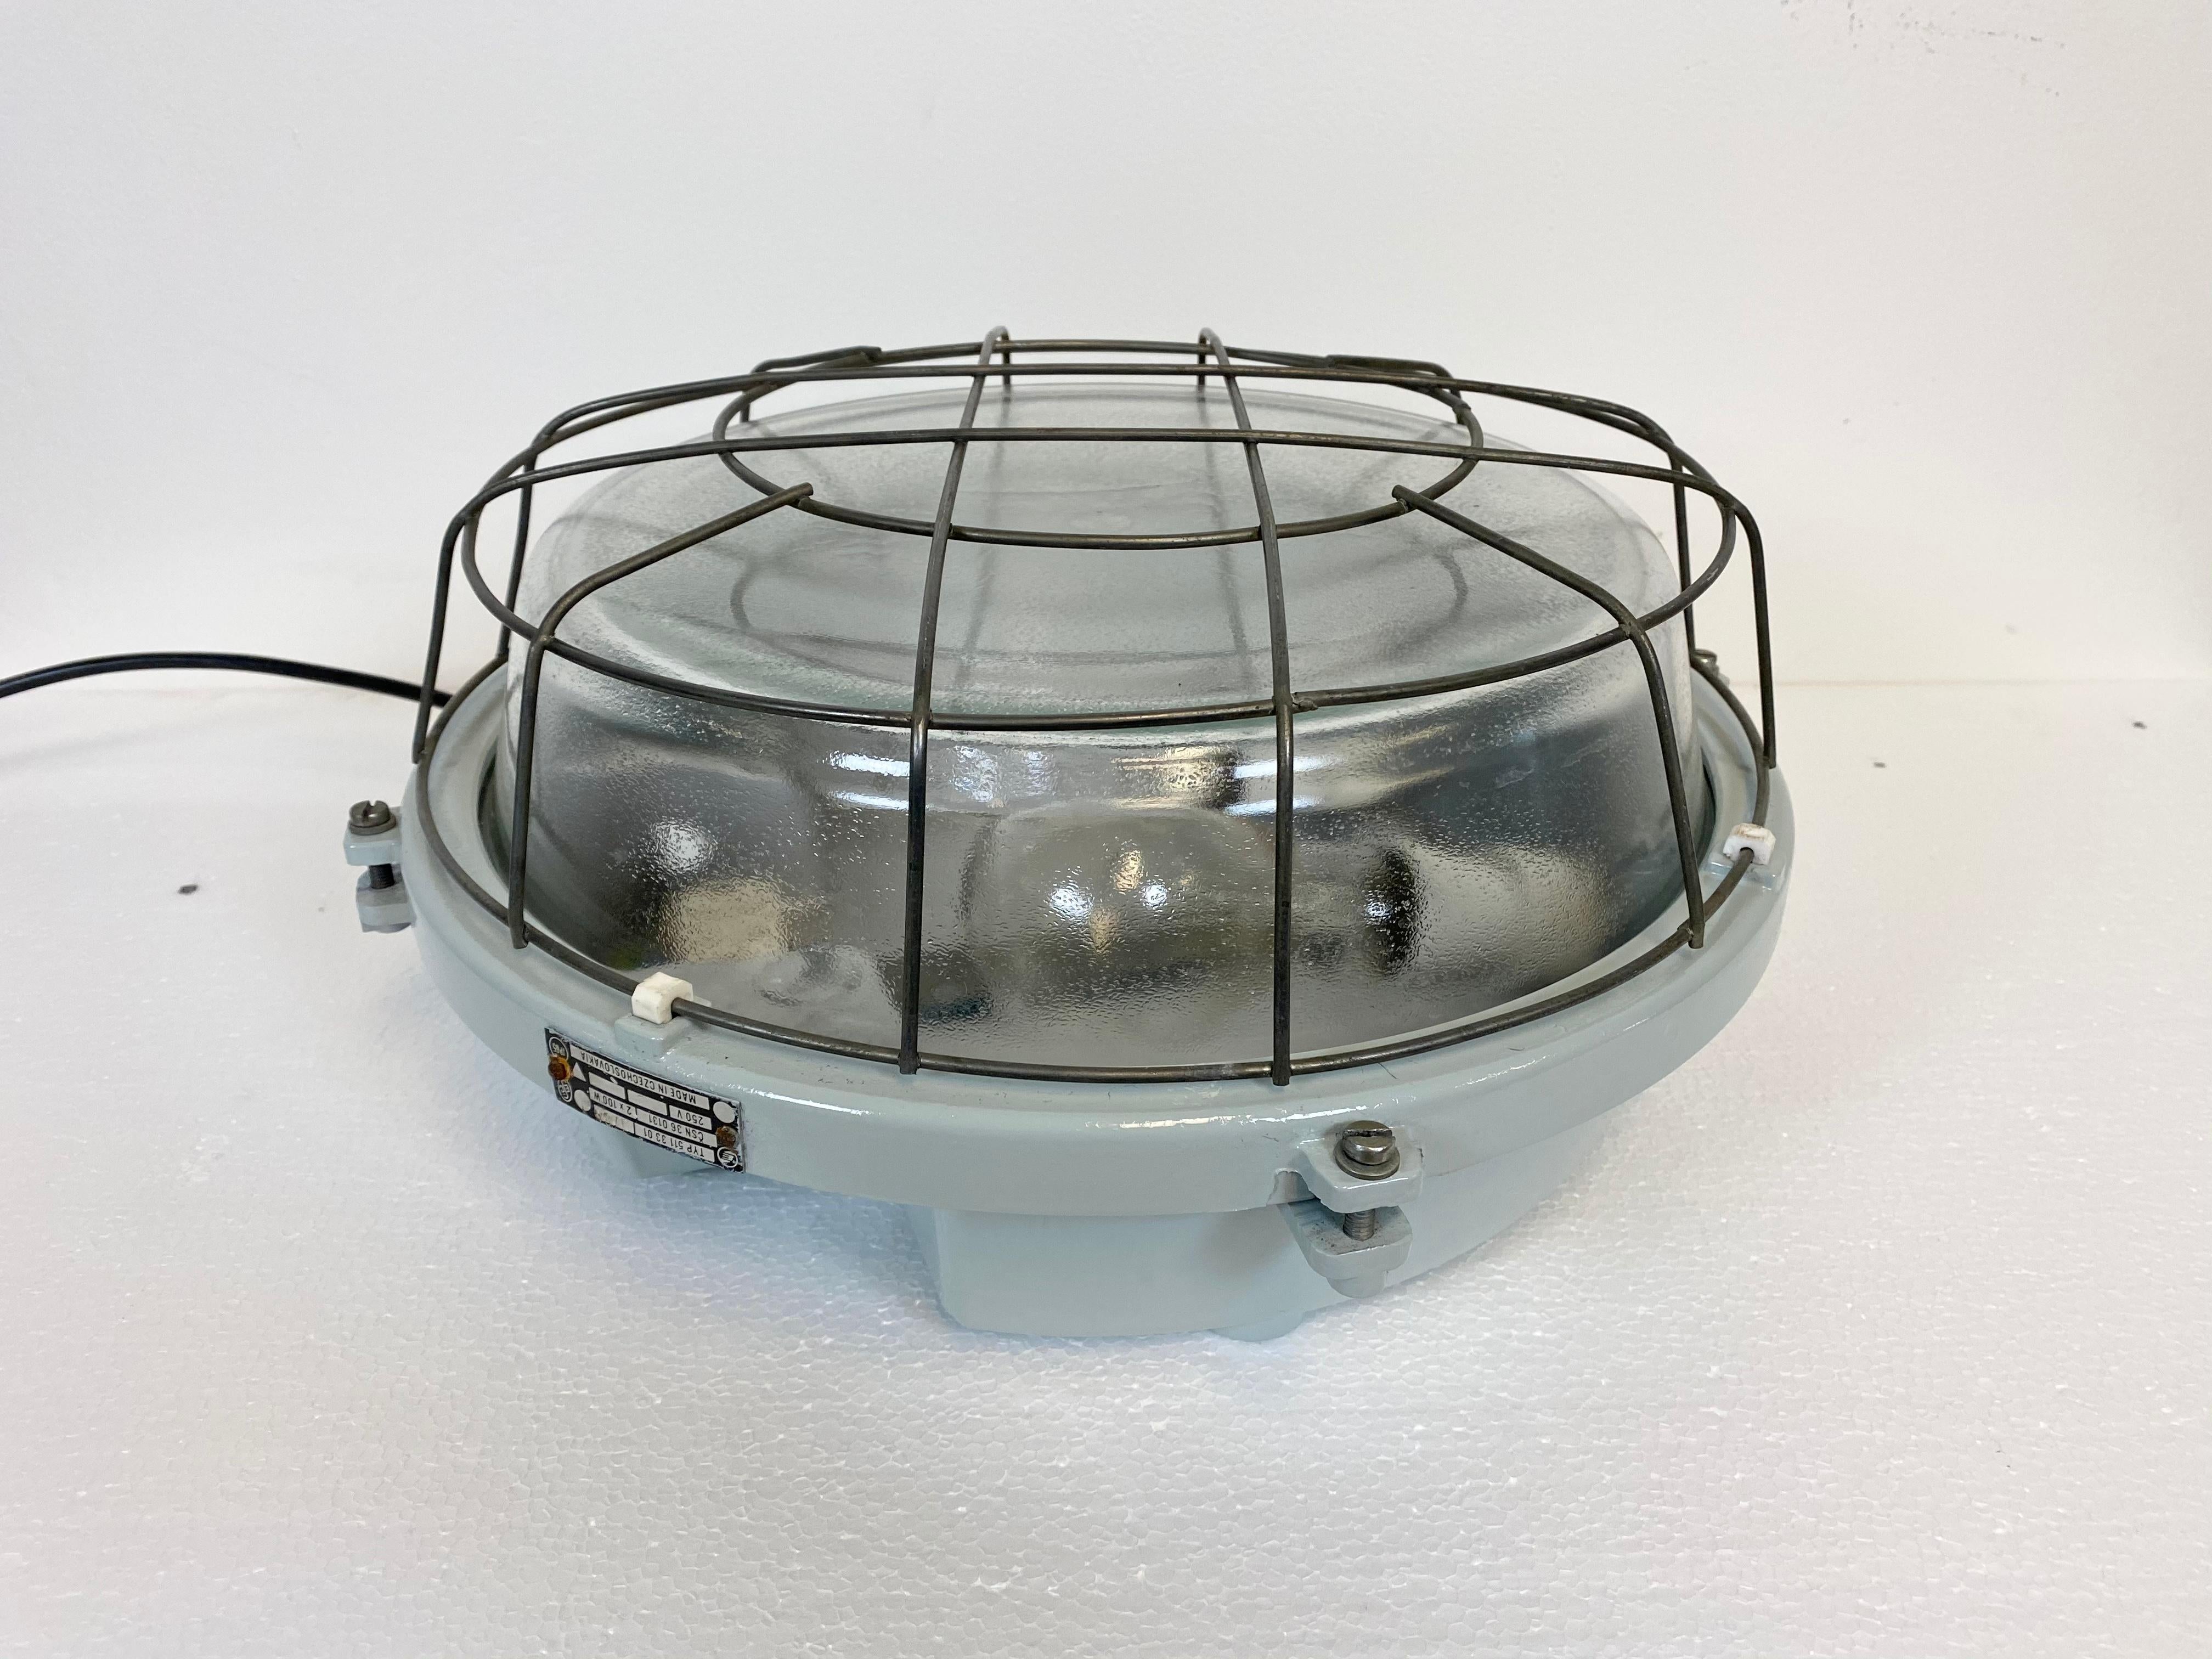 This grey wall lamp was made by Elektrosvit in former Czechoslovakia during the 1980s. It features cast aluminium body, frosted curved glass cover and steel grid. Two new porcelain sockets for E 27 lightbulbs and new wire. The light can also be used